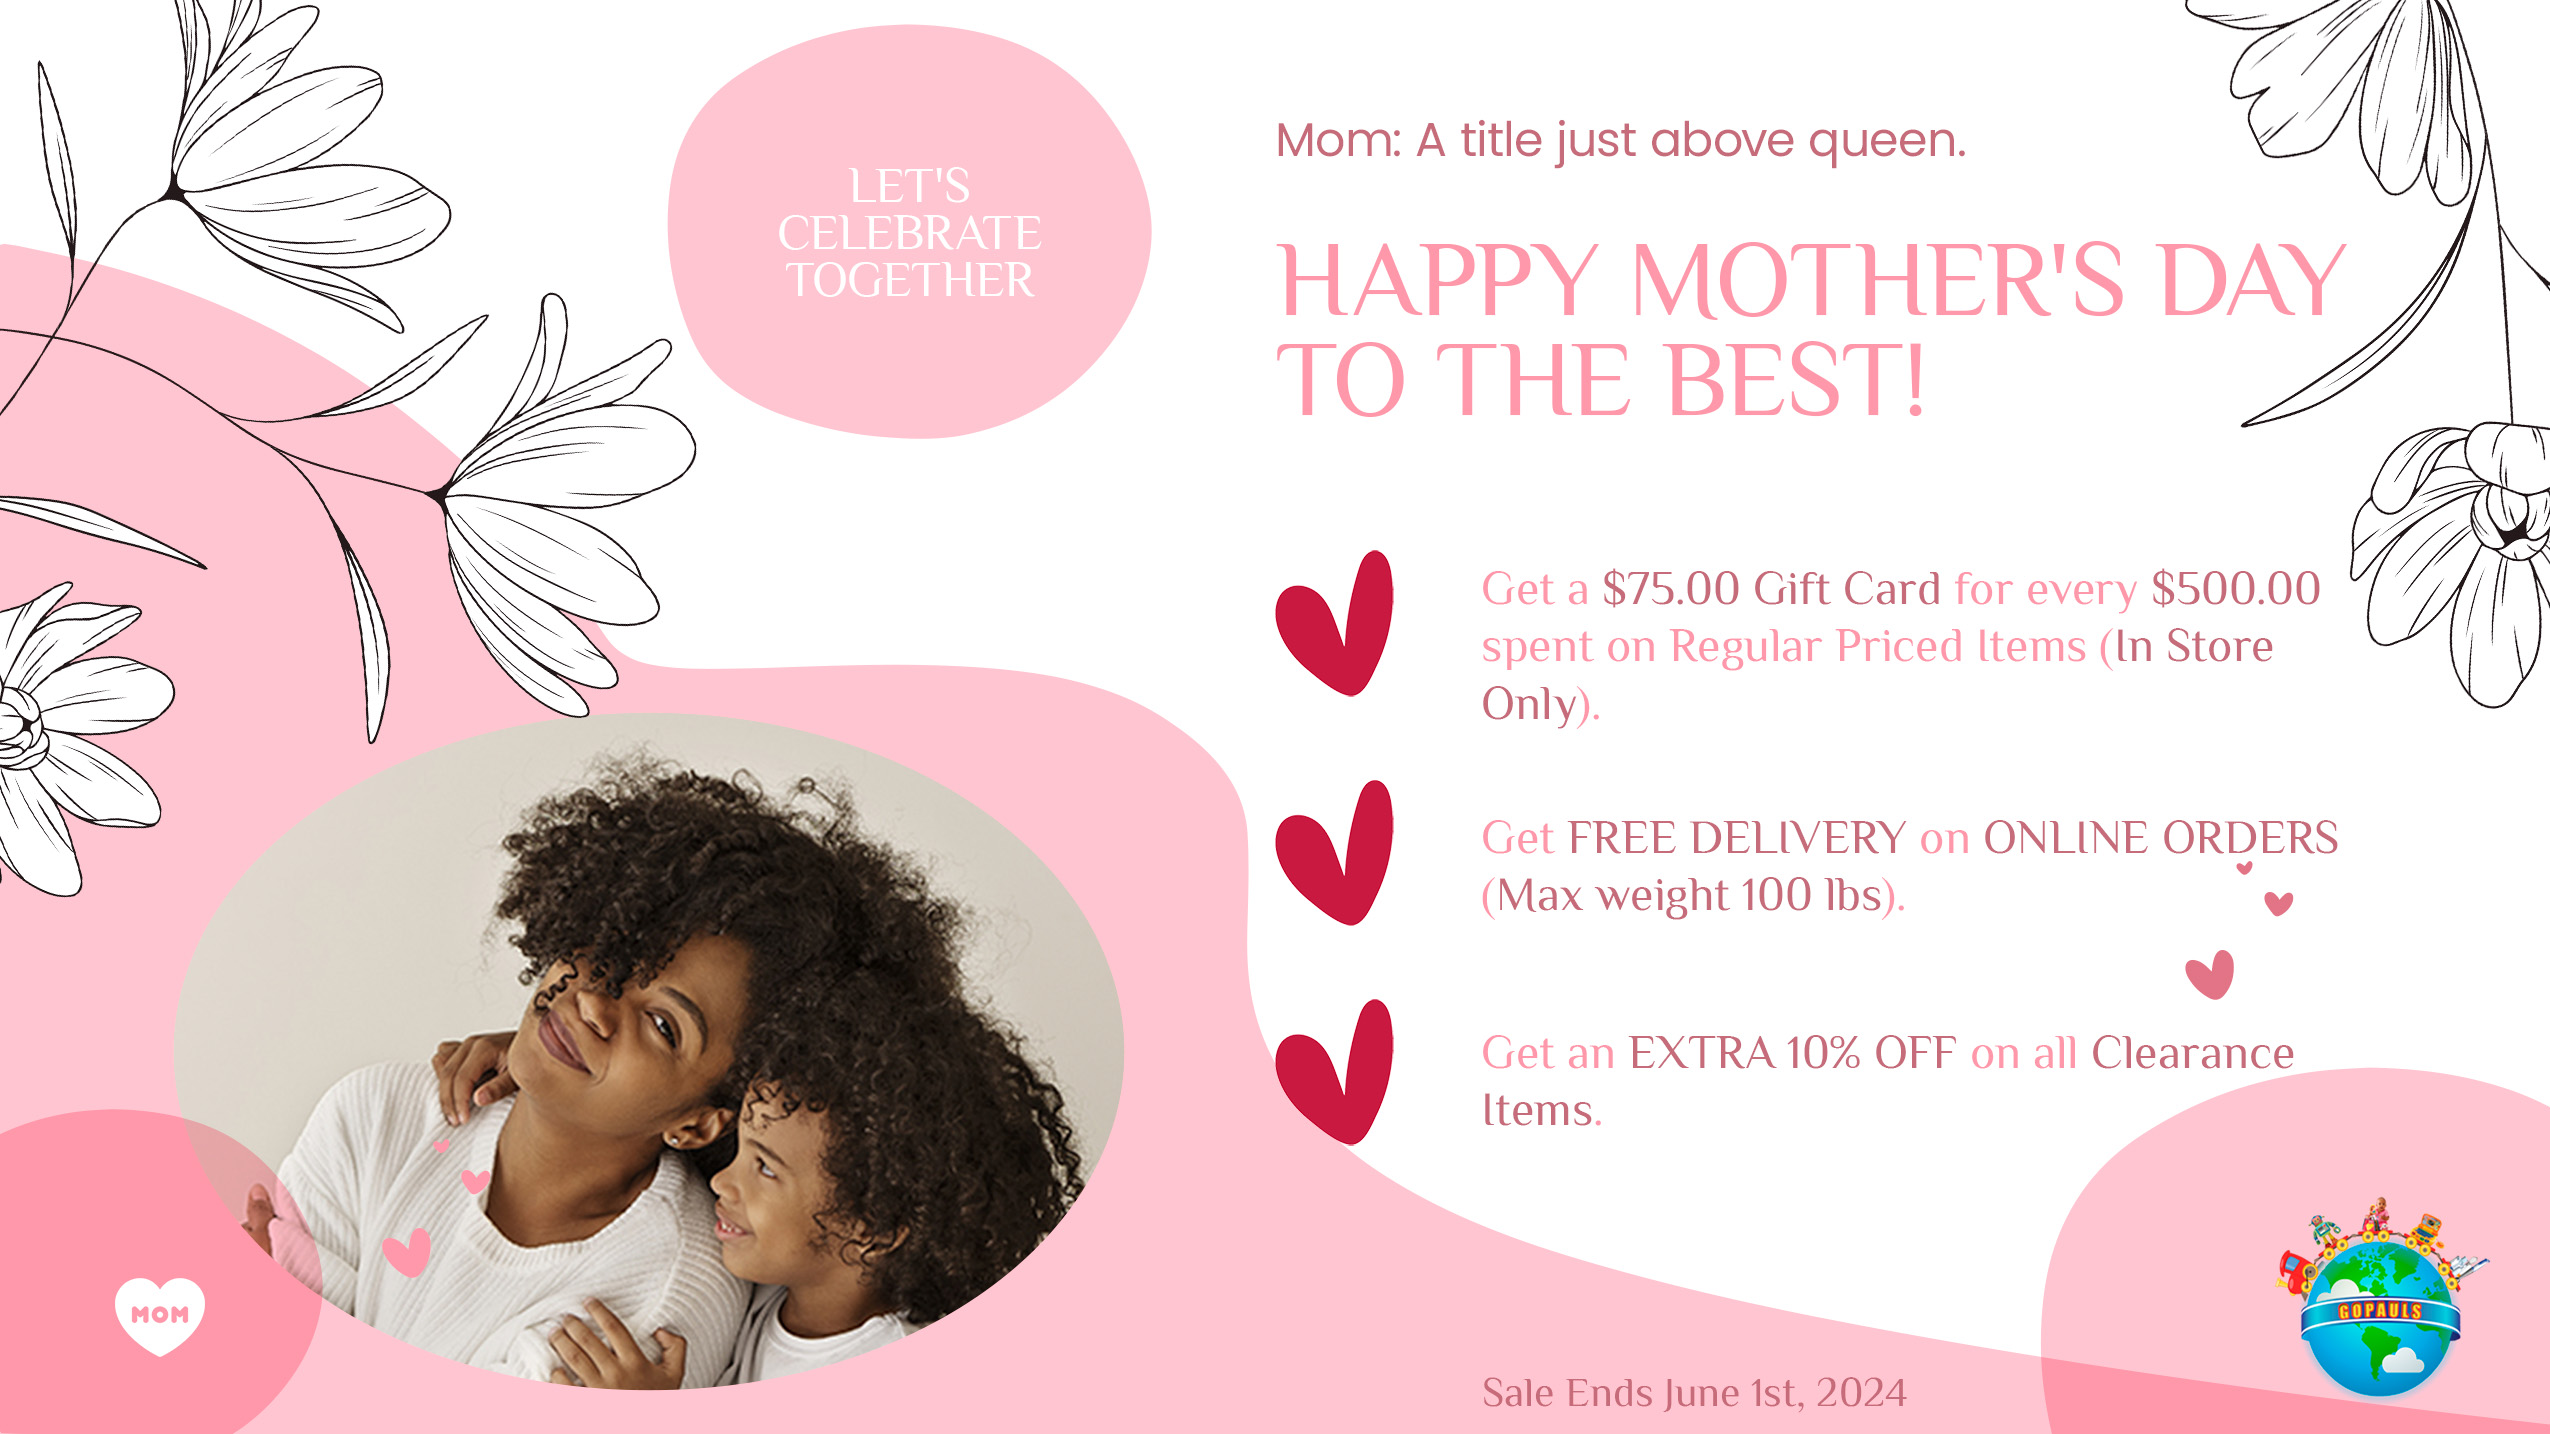 Mothers Day Sale Details